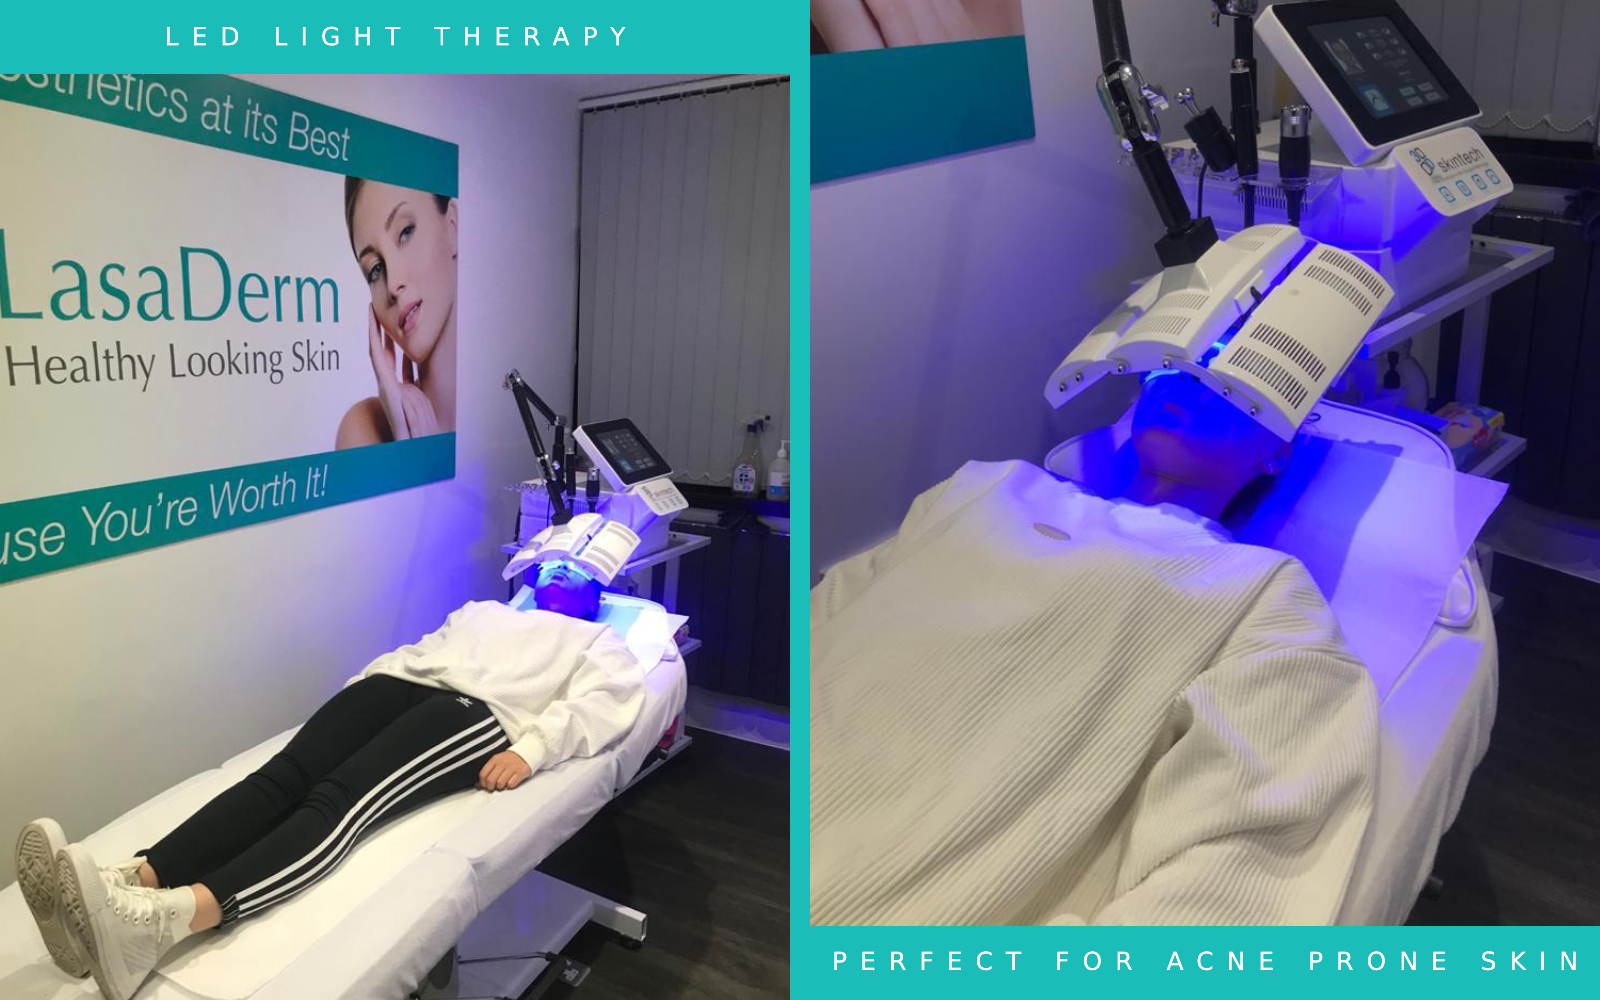 Before and After LED Light Therapy